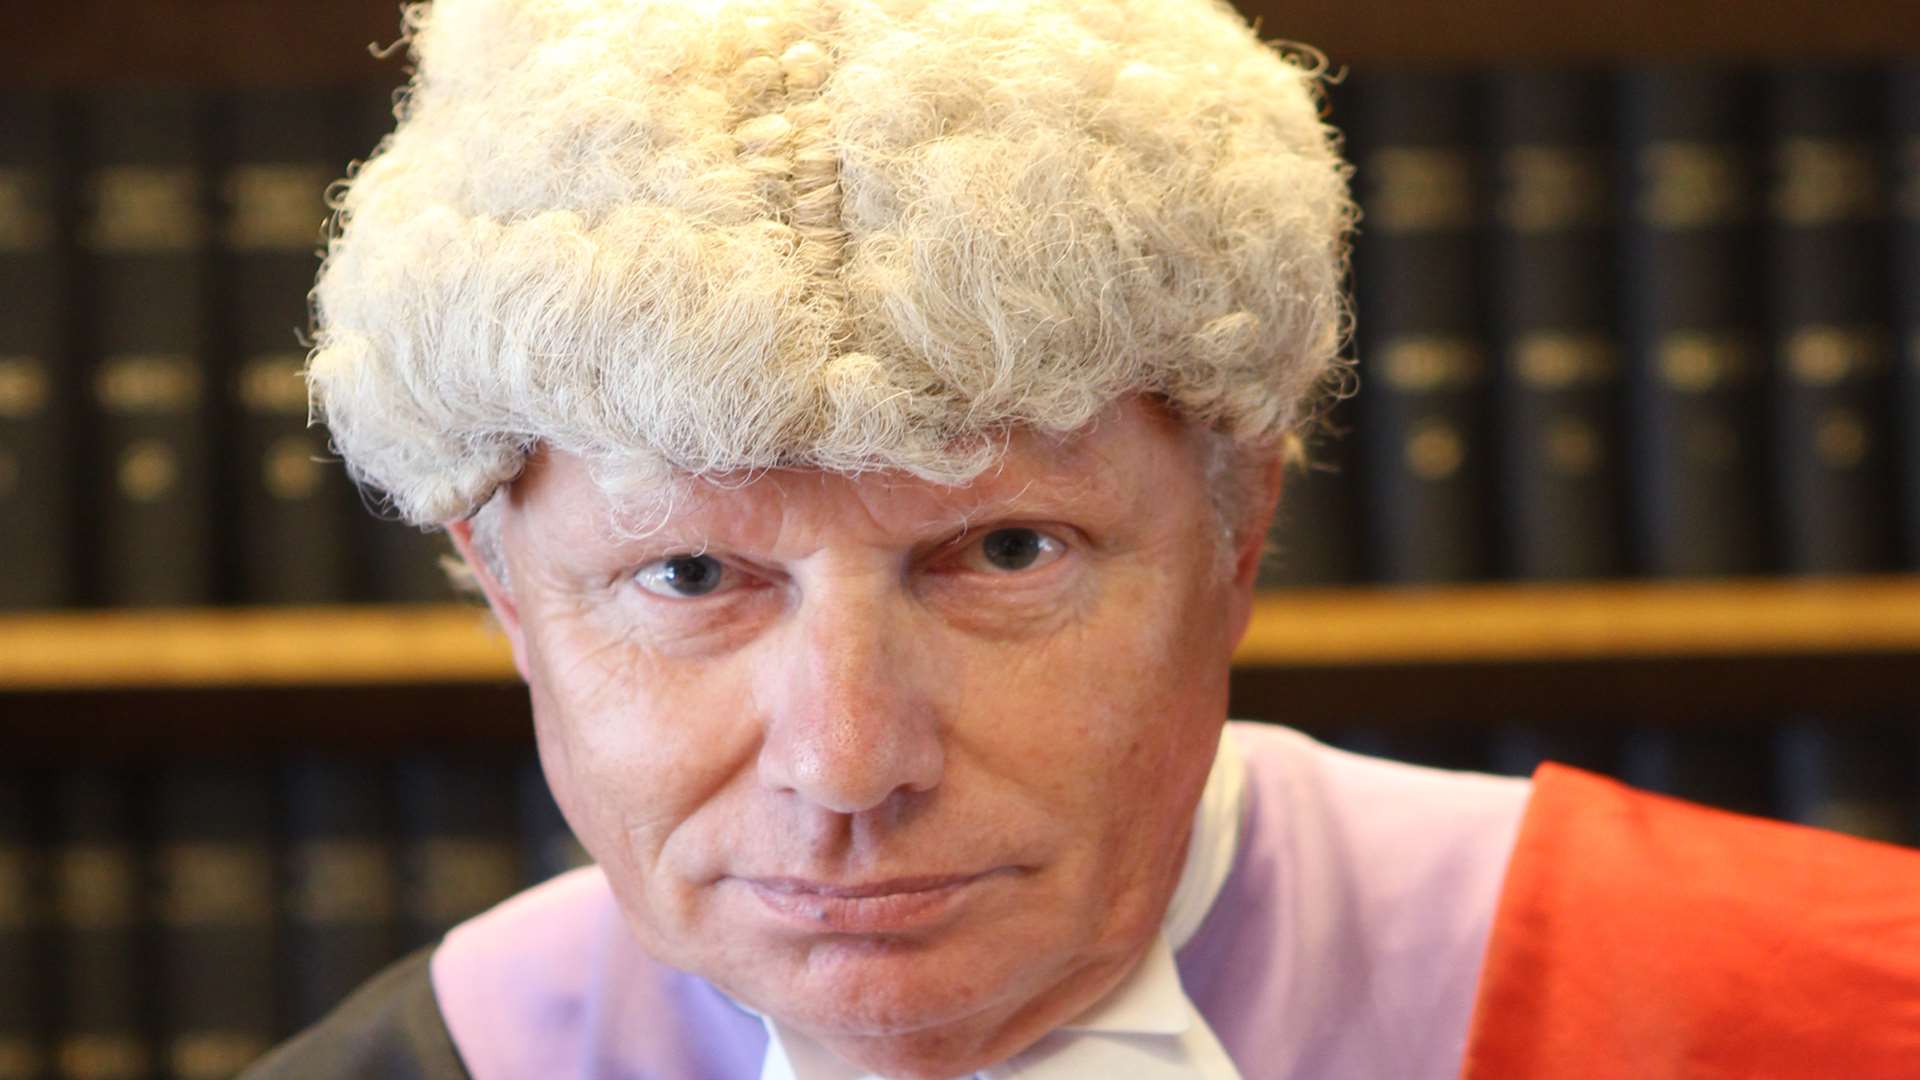 Judge Martin Joy said Parr posed a high risk of causing serious harm to police officers